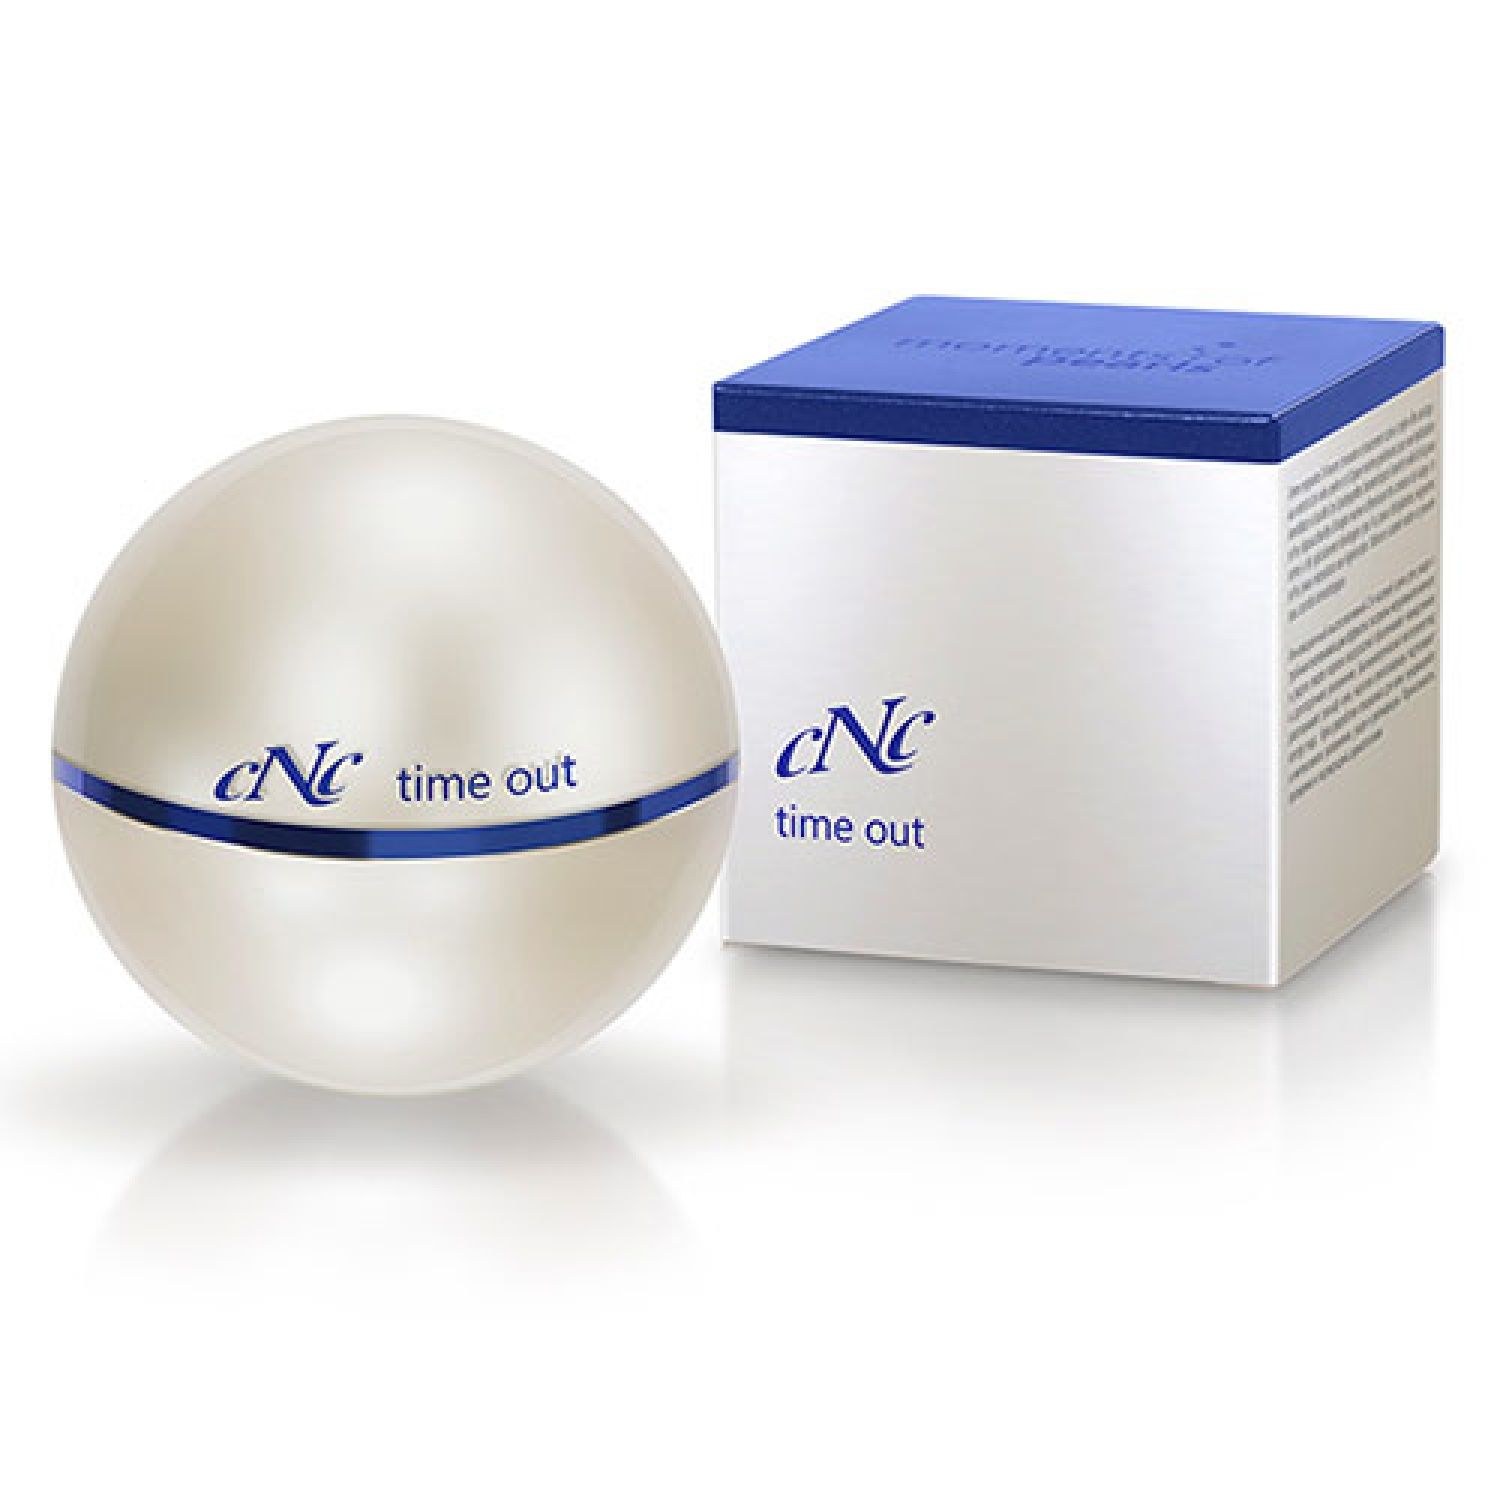 CNC cosmetic Moments of Pearls time out